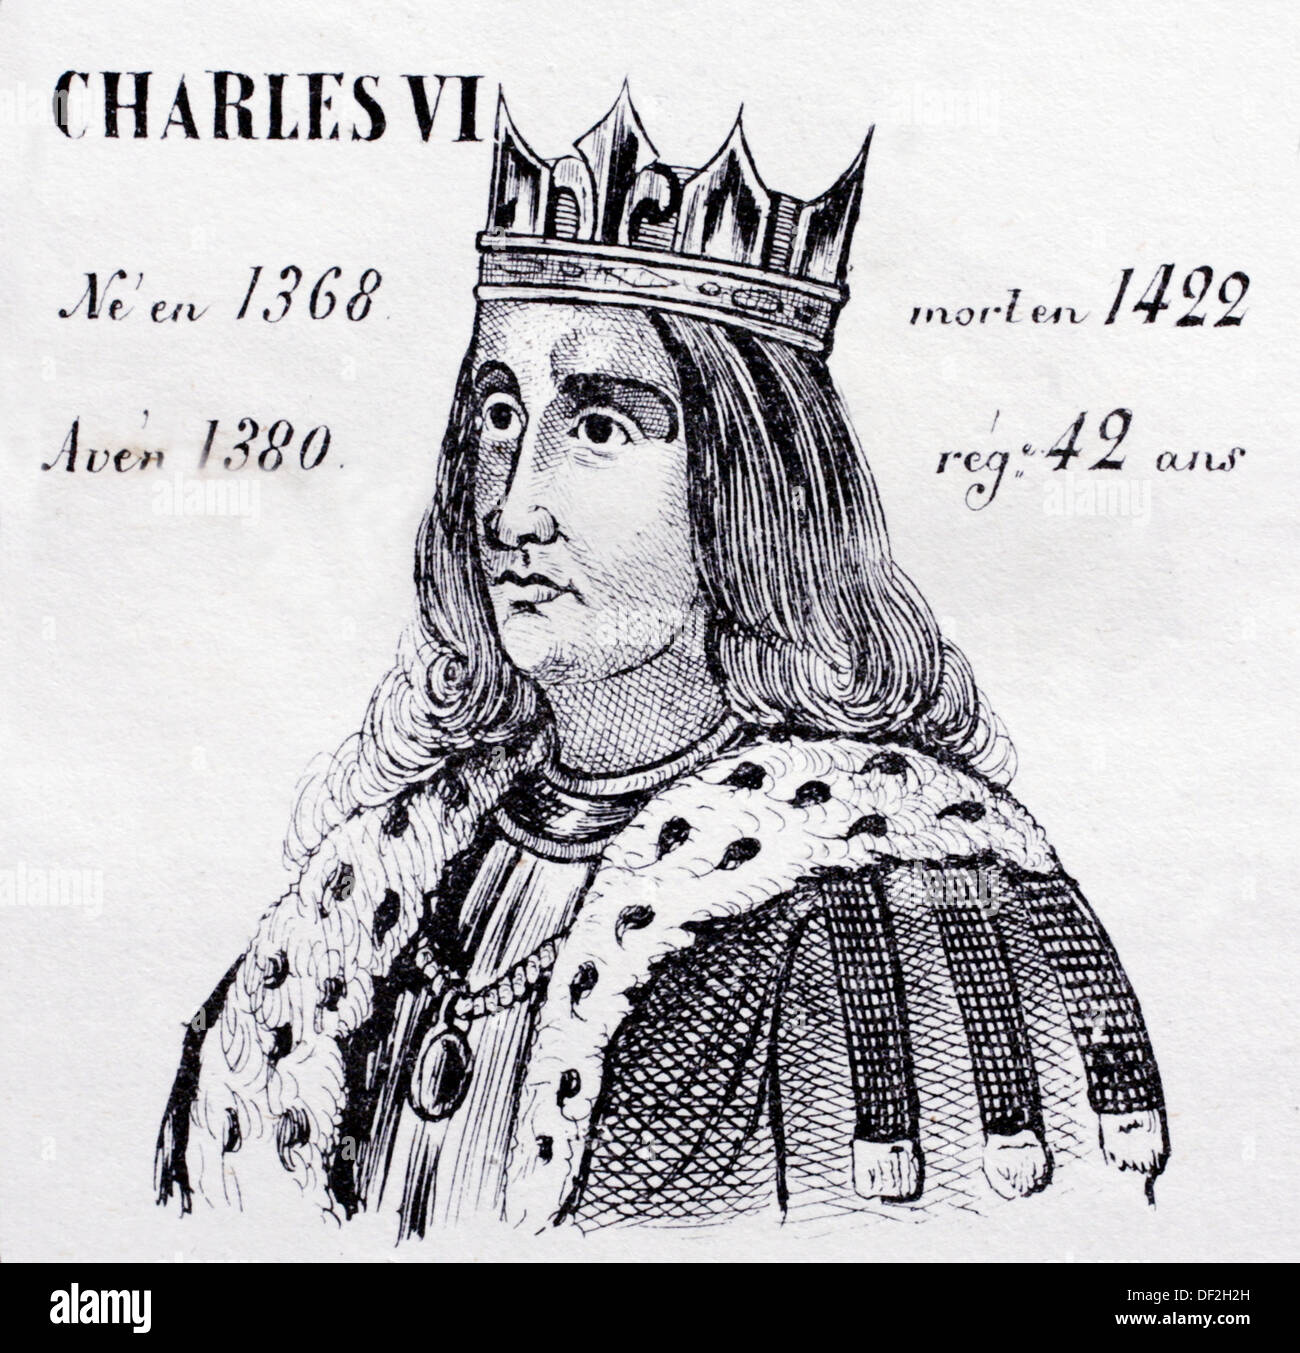 Charles VI, king of France from 1380 to 1422. History of France, by  J.Henry (Paris, 1842) Stock Photo